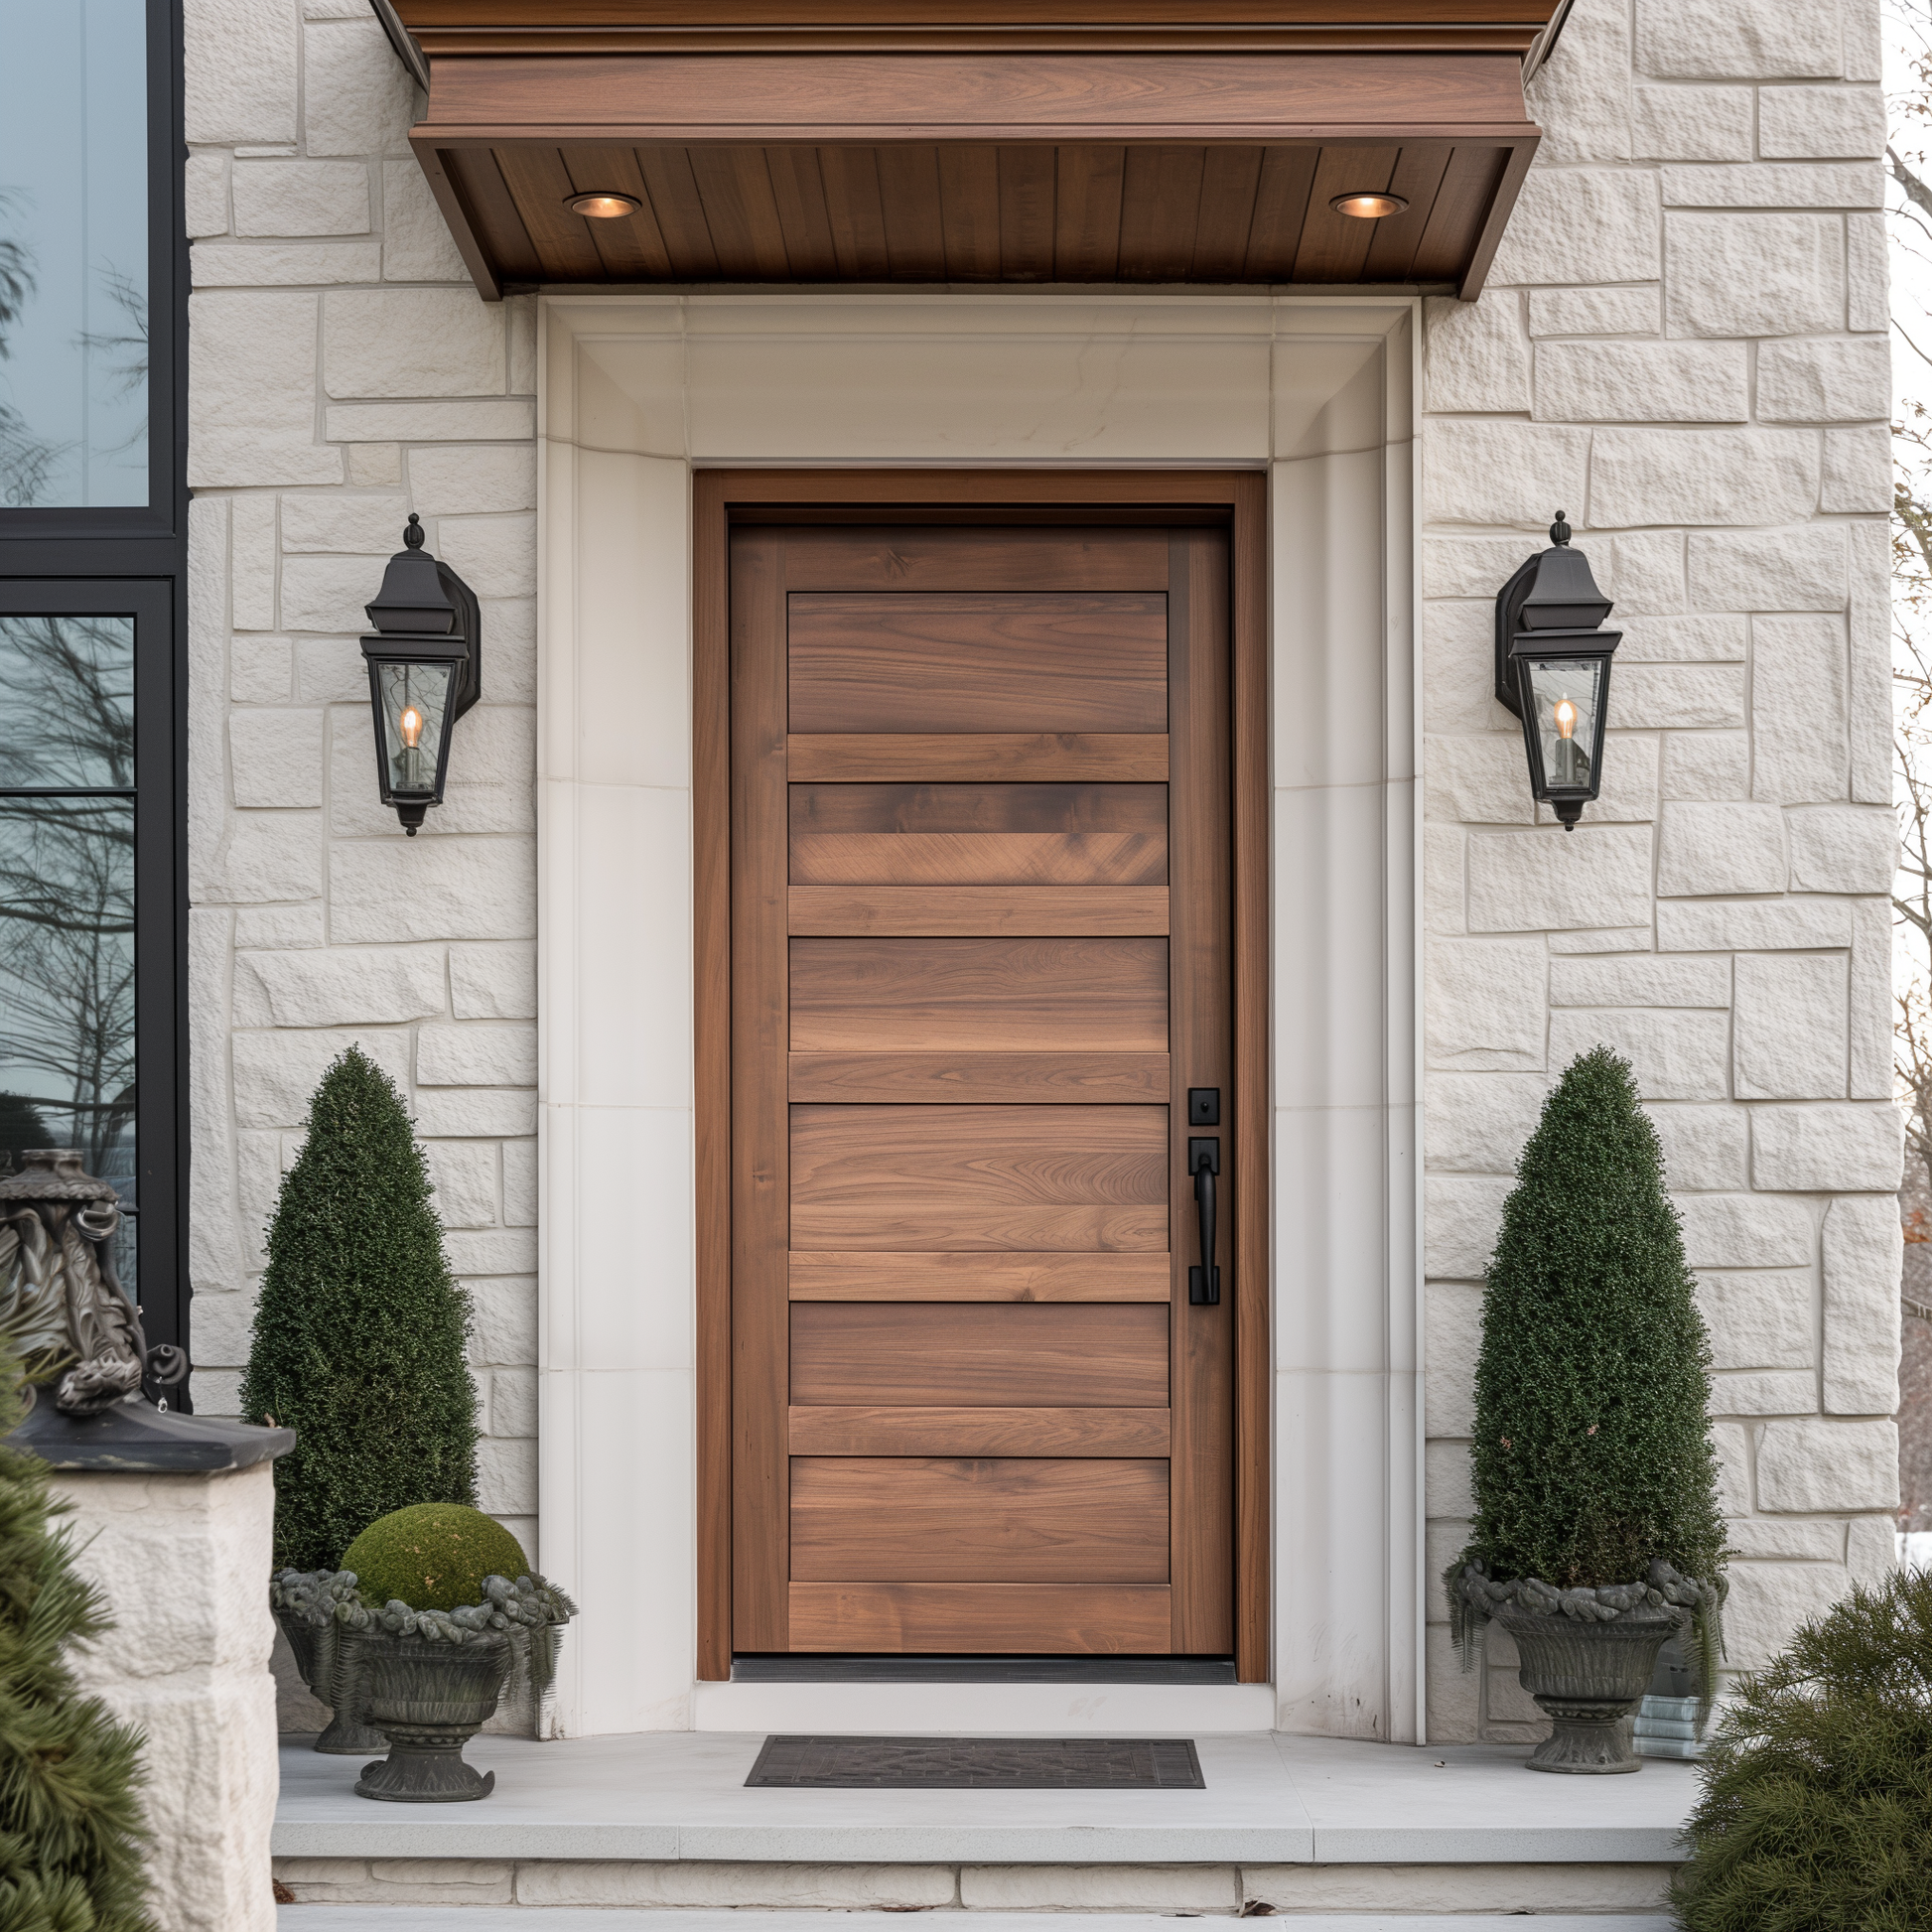 Caroline bespoke exterior solid walnut front exterior door fully custom and customizable made in usa america handcrafted, pictured on a white stone modern home.